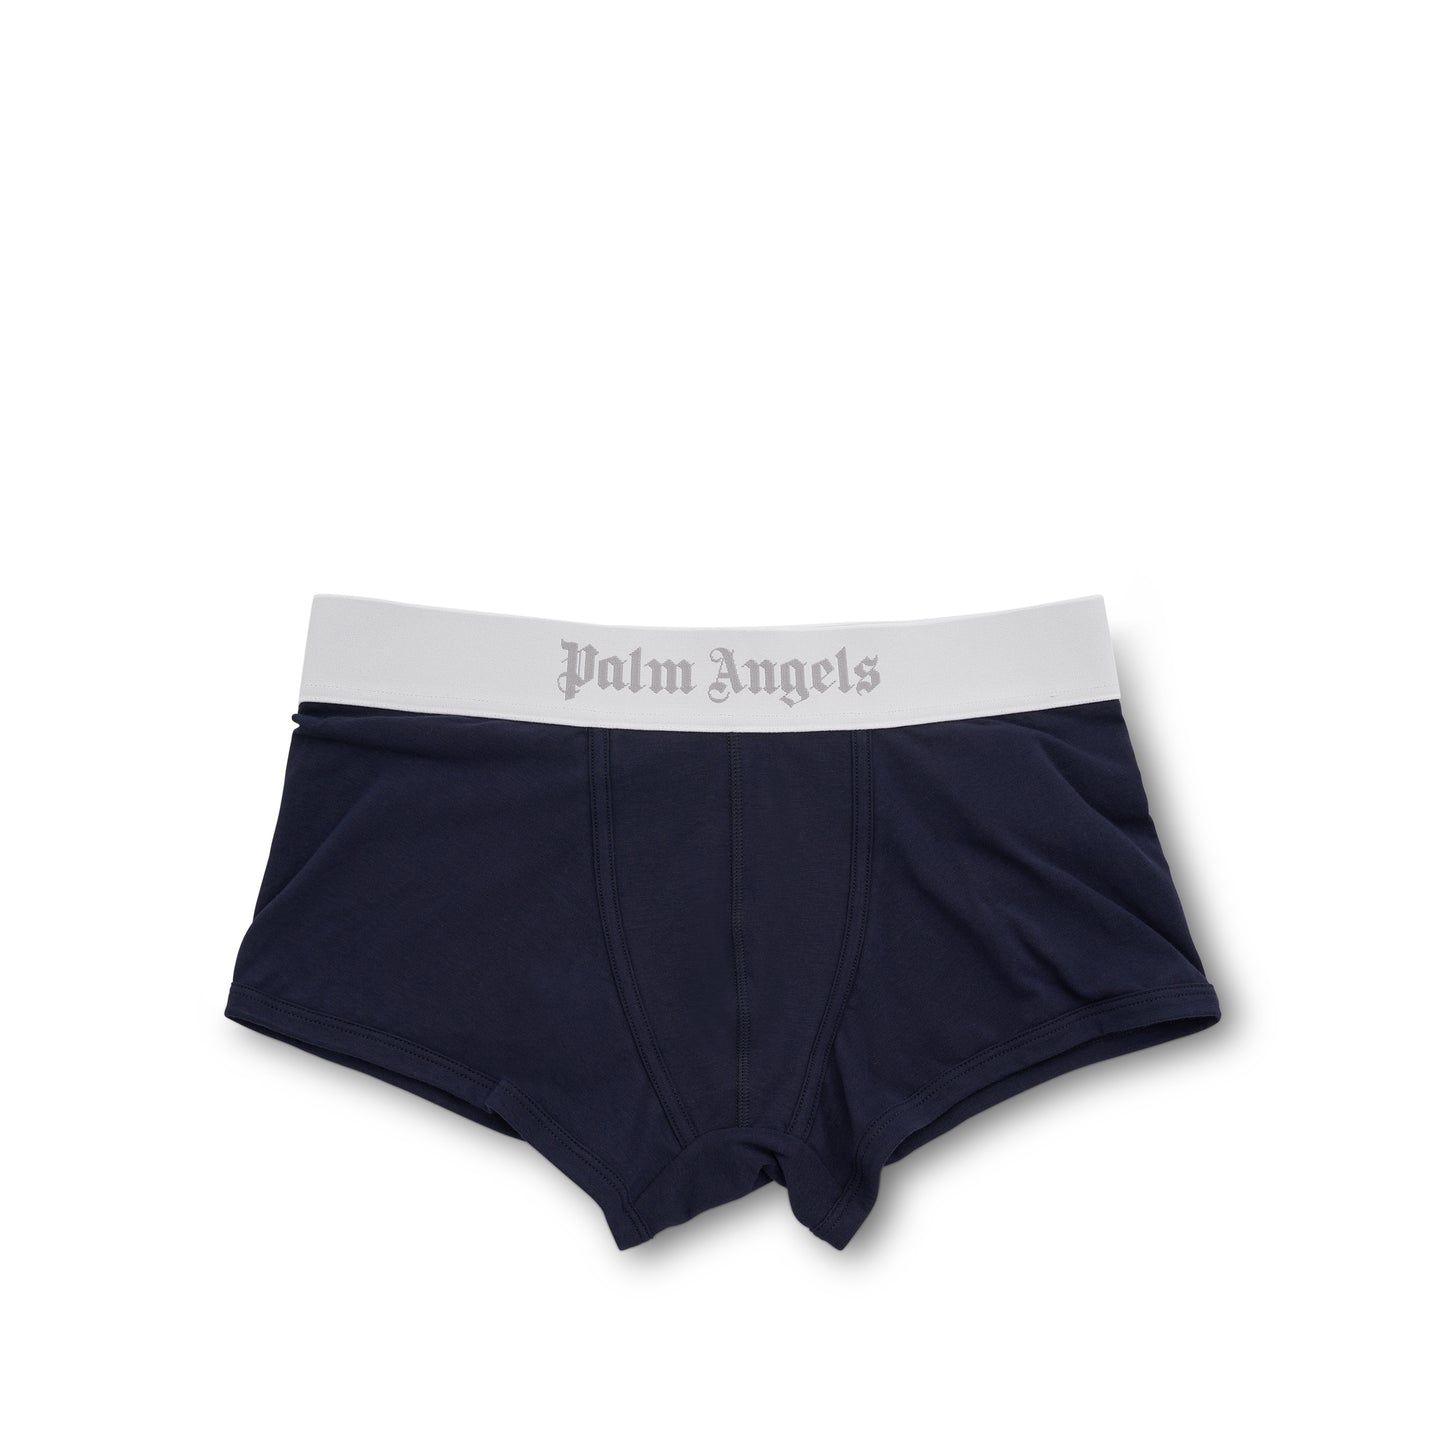 PA Trunk Bipack in Navy Blue/White